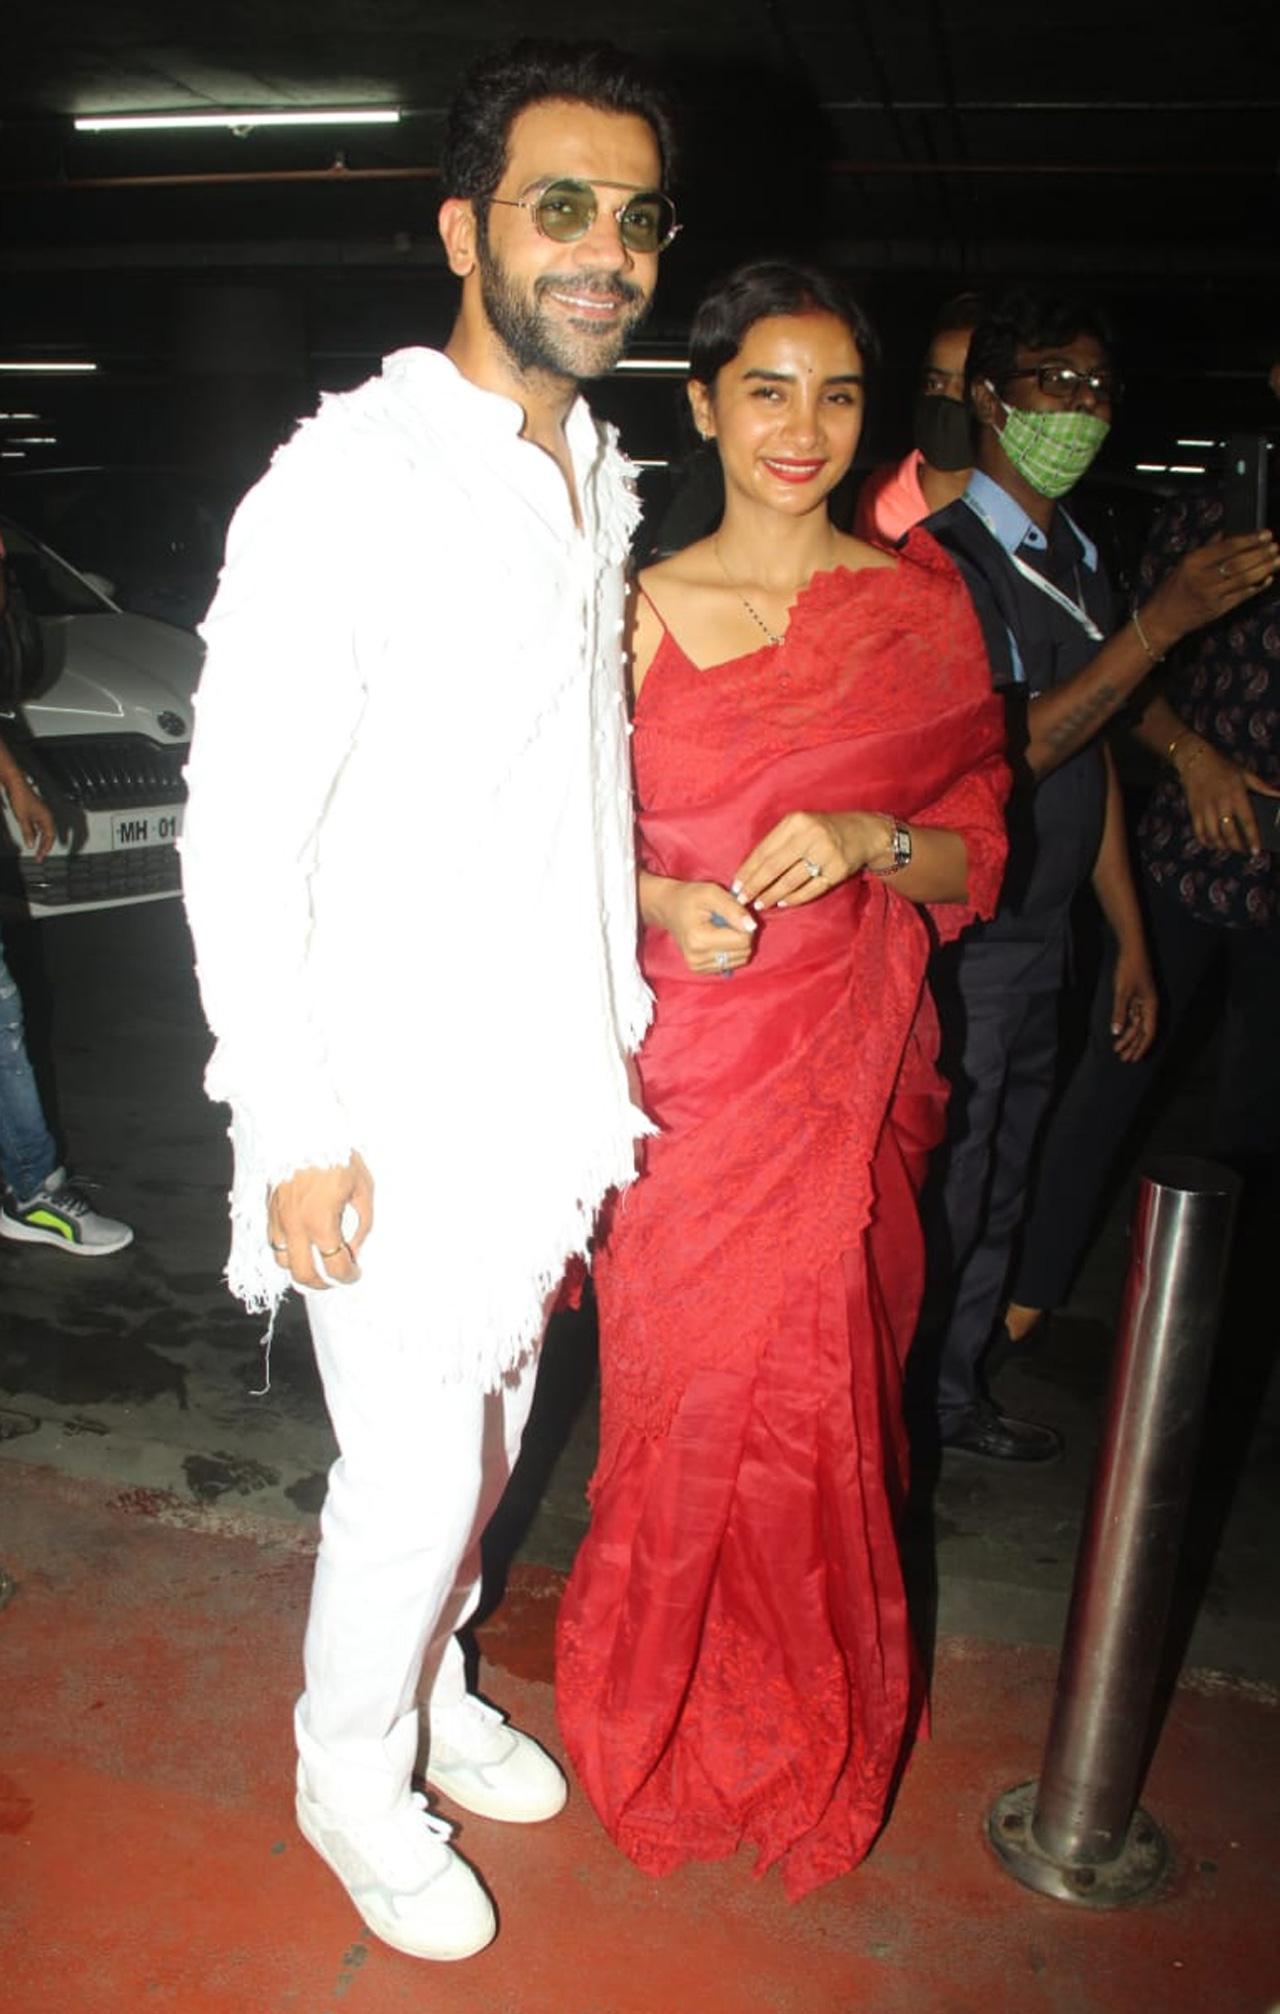 Since Rajkummar Rao and Patralekhaa are extremely private people, they requested their friends and family to not click pictures and videos on their phones. The couple wanted to be the first ones to share their special news with their fans. Which means the fans may have to wait a little longer to see some more inside pictures and videos from the star couple's wedding ceremony.